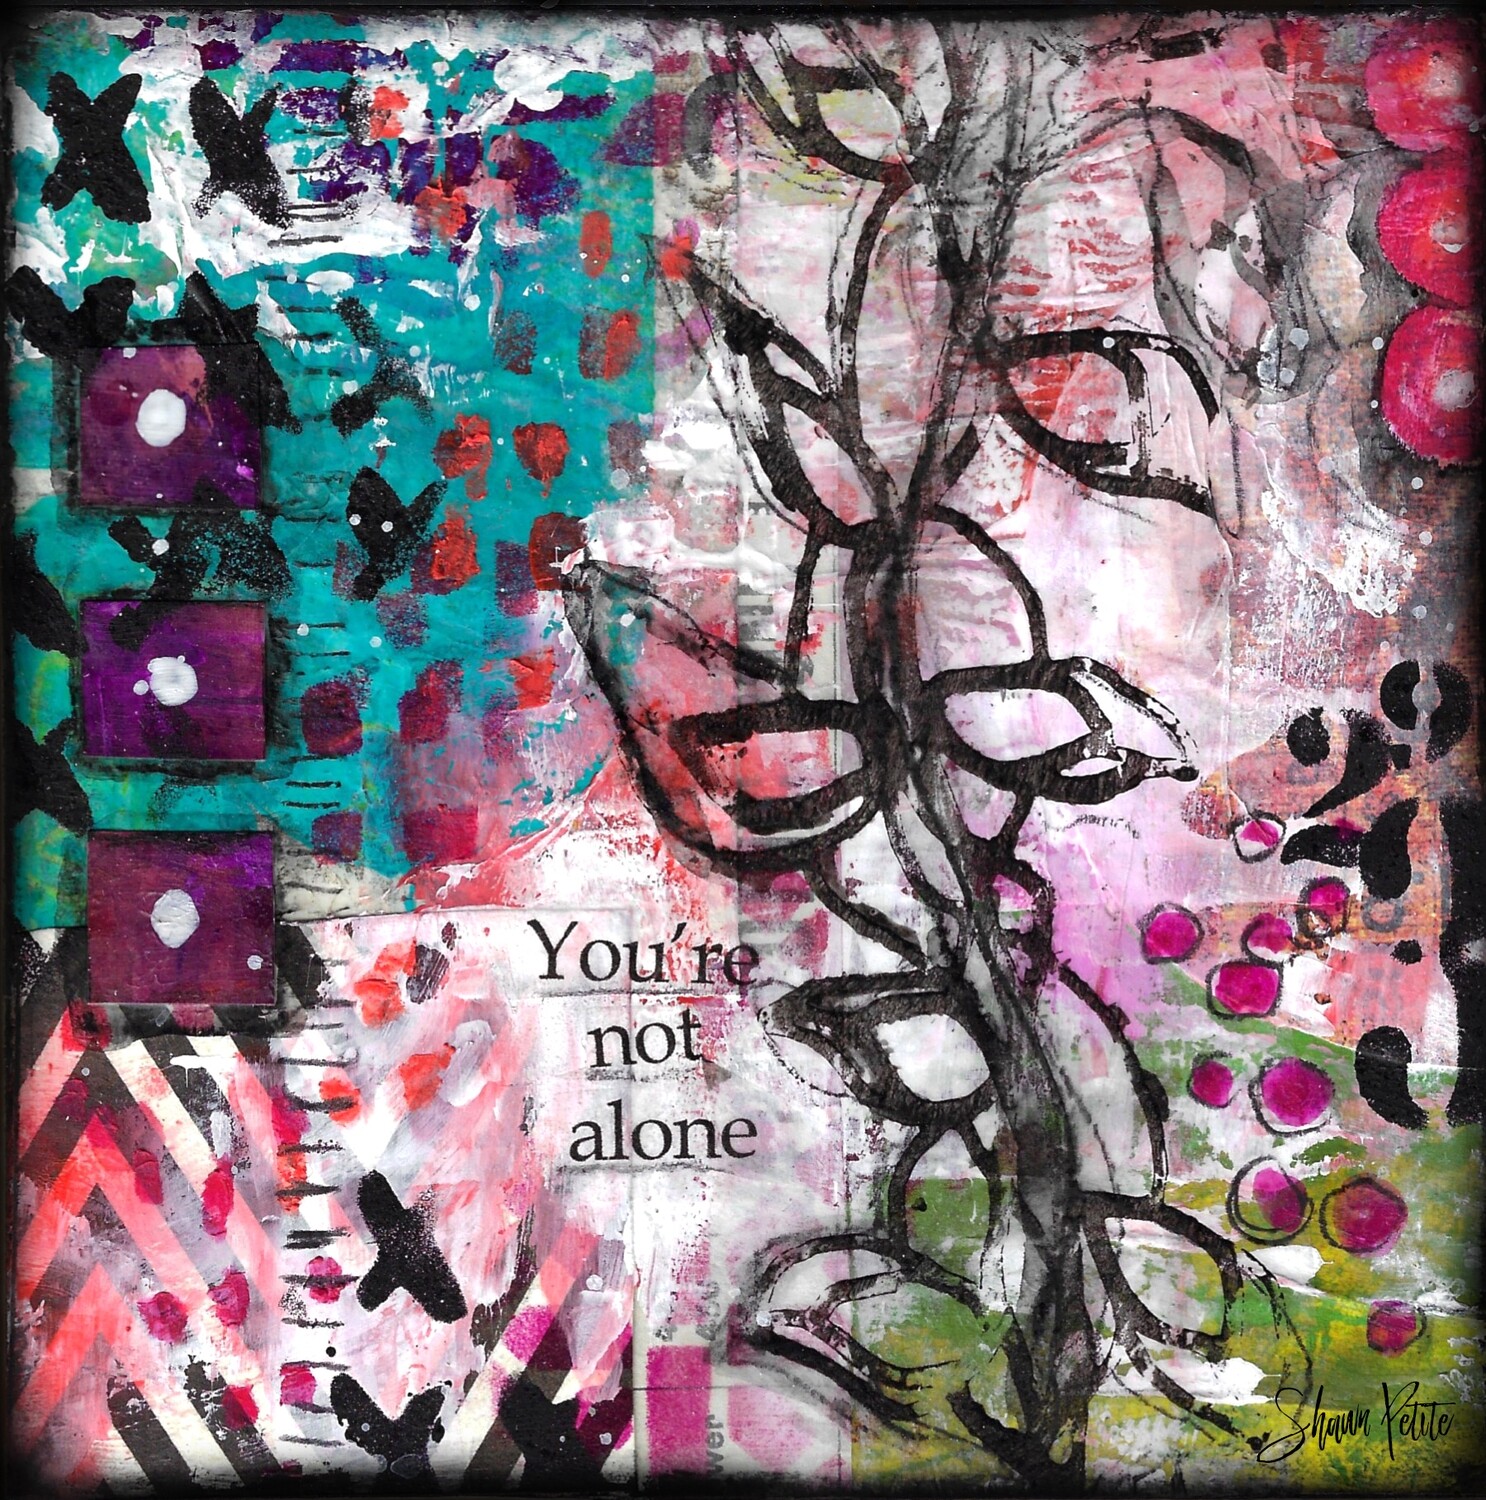 "You're not alone" encouraging words series 6x6 mixed media original